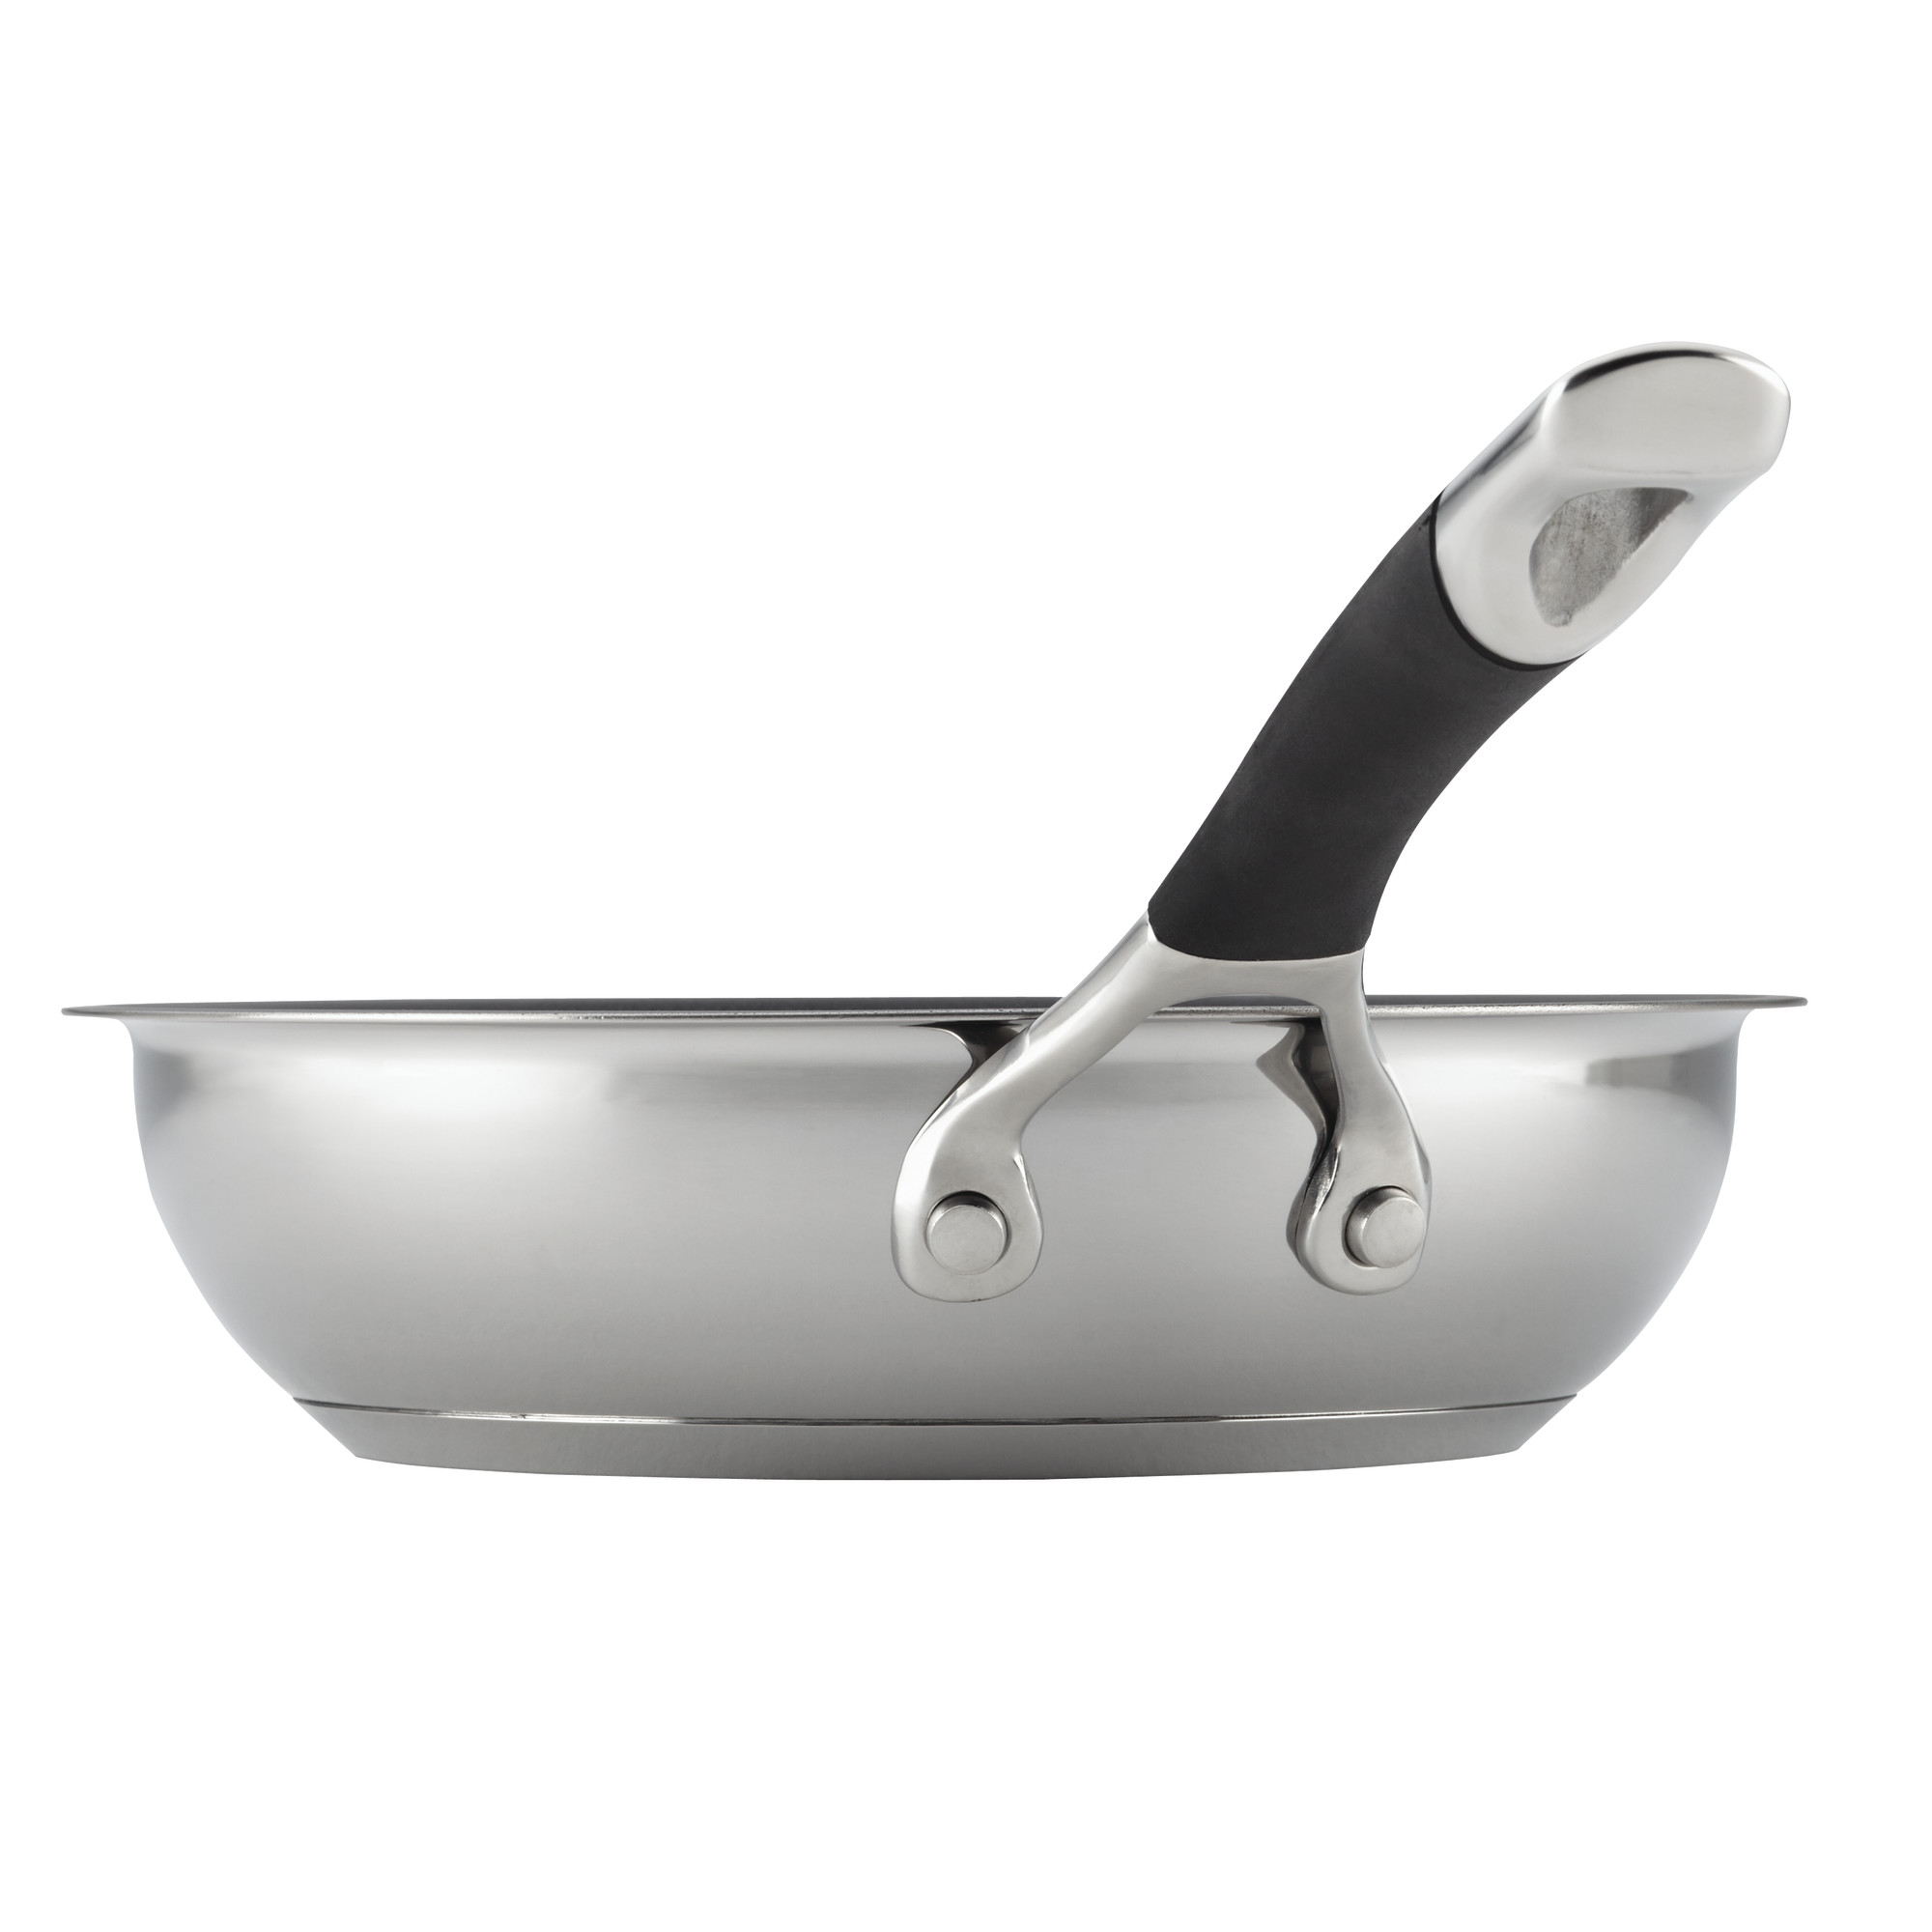 Circulon 11 Piece Momentum Stainless Steel Nonstick Pots and Pans - image 4 of 7